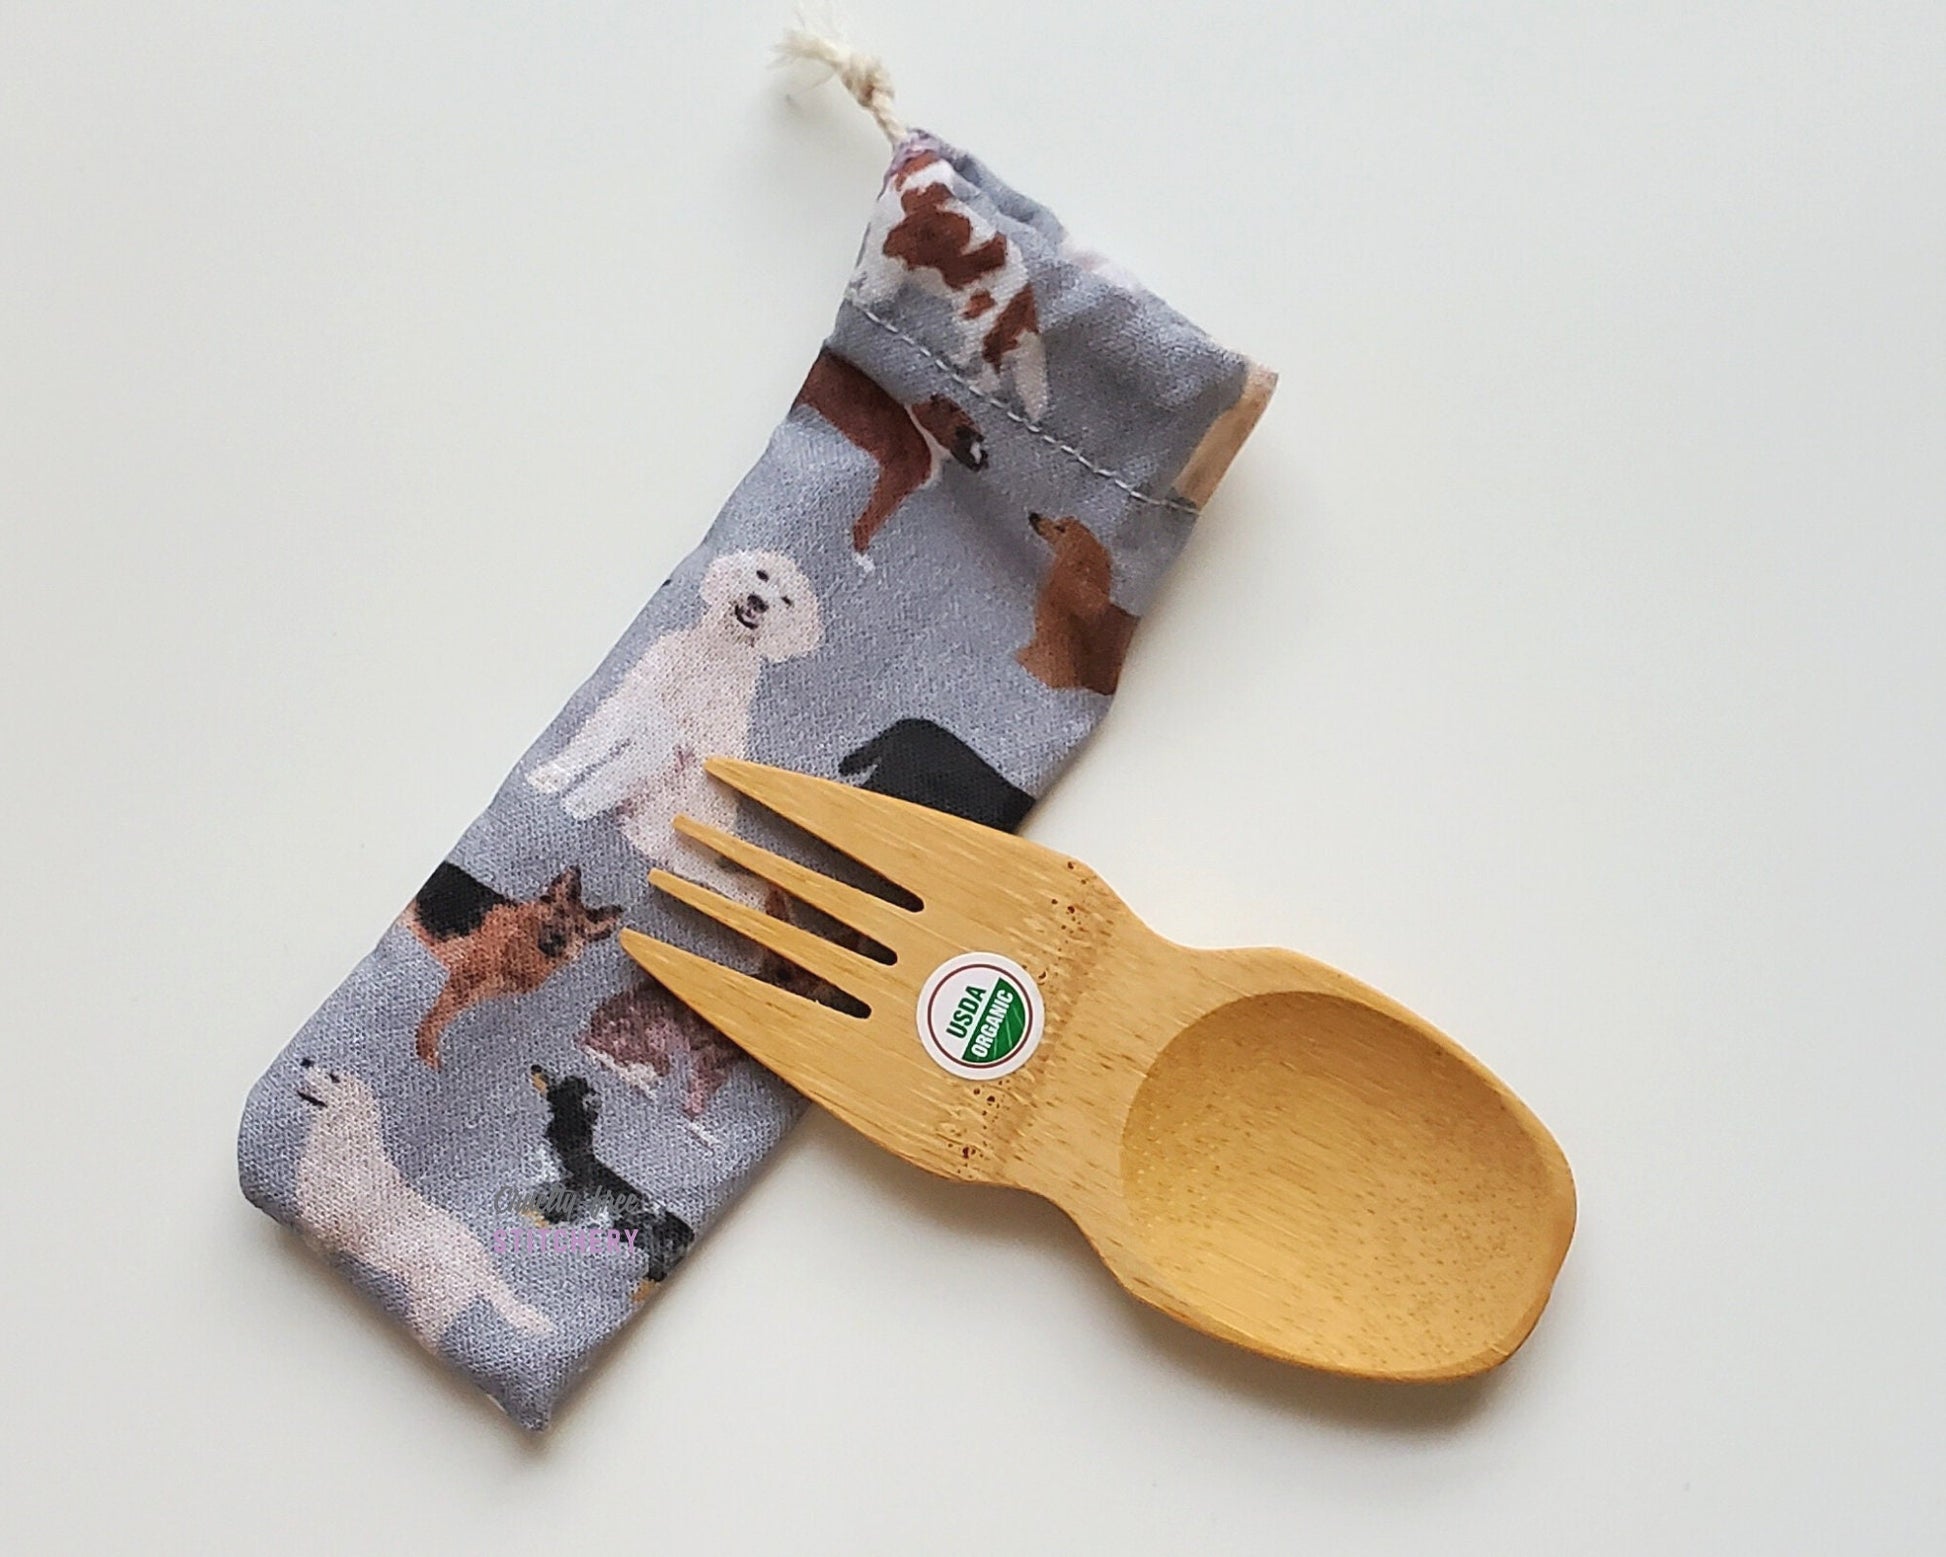 Reusable bamboo spork with pouch. The pouch is grey with various dogs printed on. The pouch is sitting diagonally with the spork partially on top pointing the other way. The spork is small, a double ended fork and spoon.